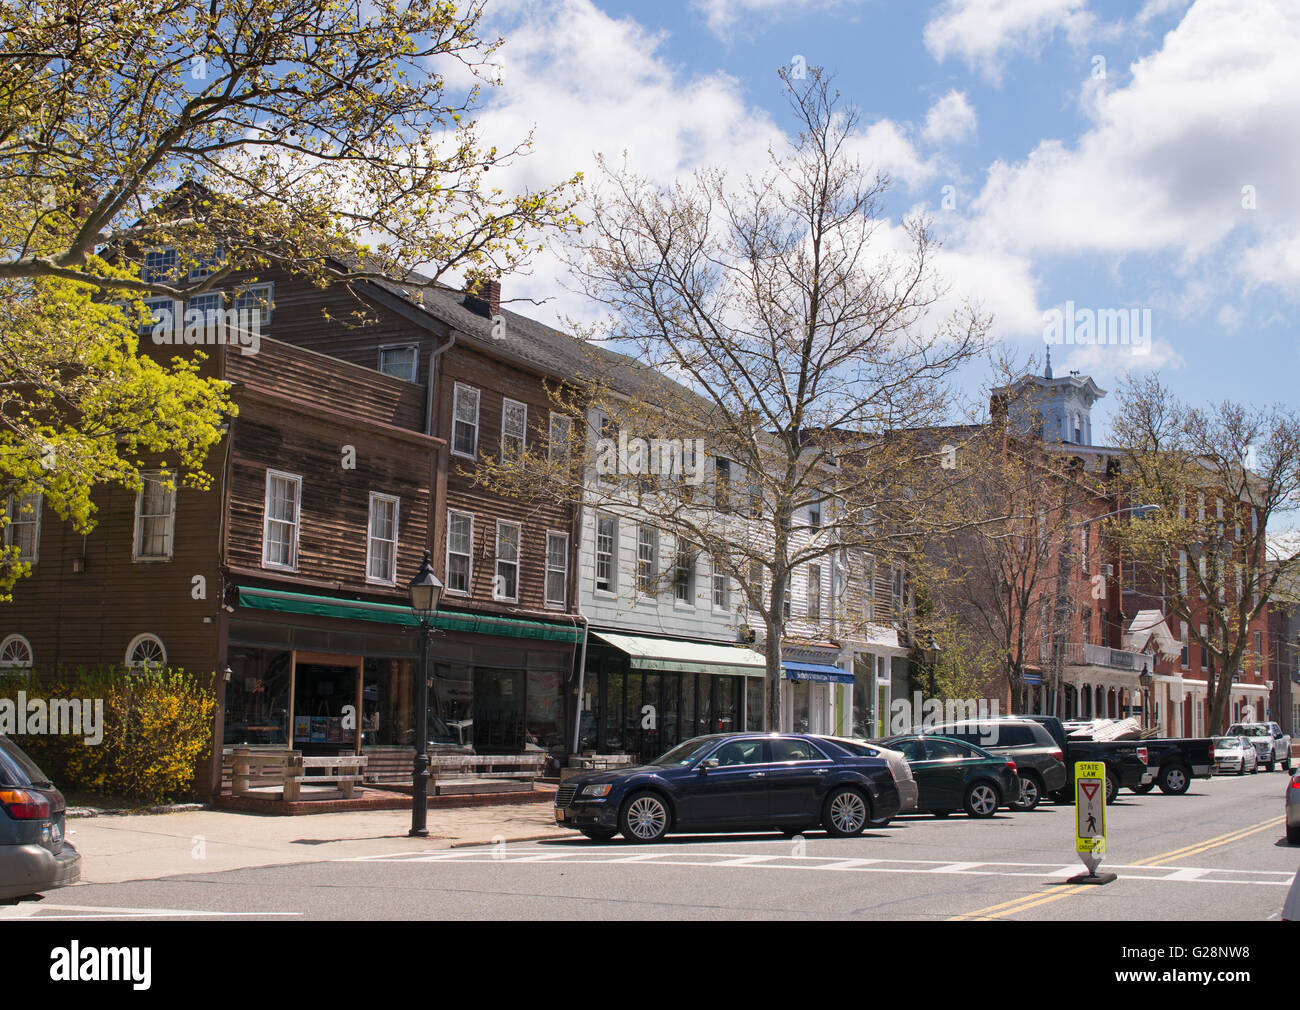 Sag harbor main street hires stock photography and images Alamy